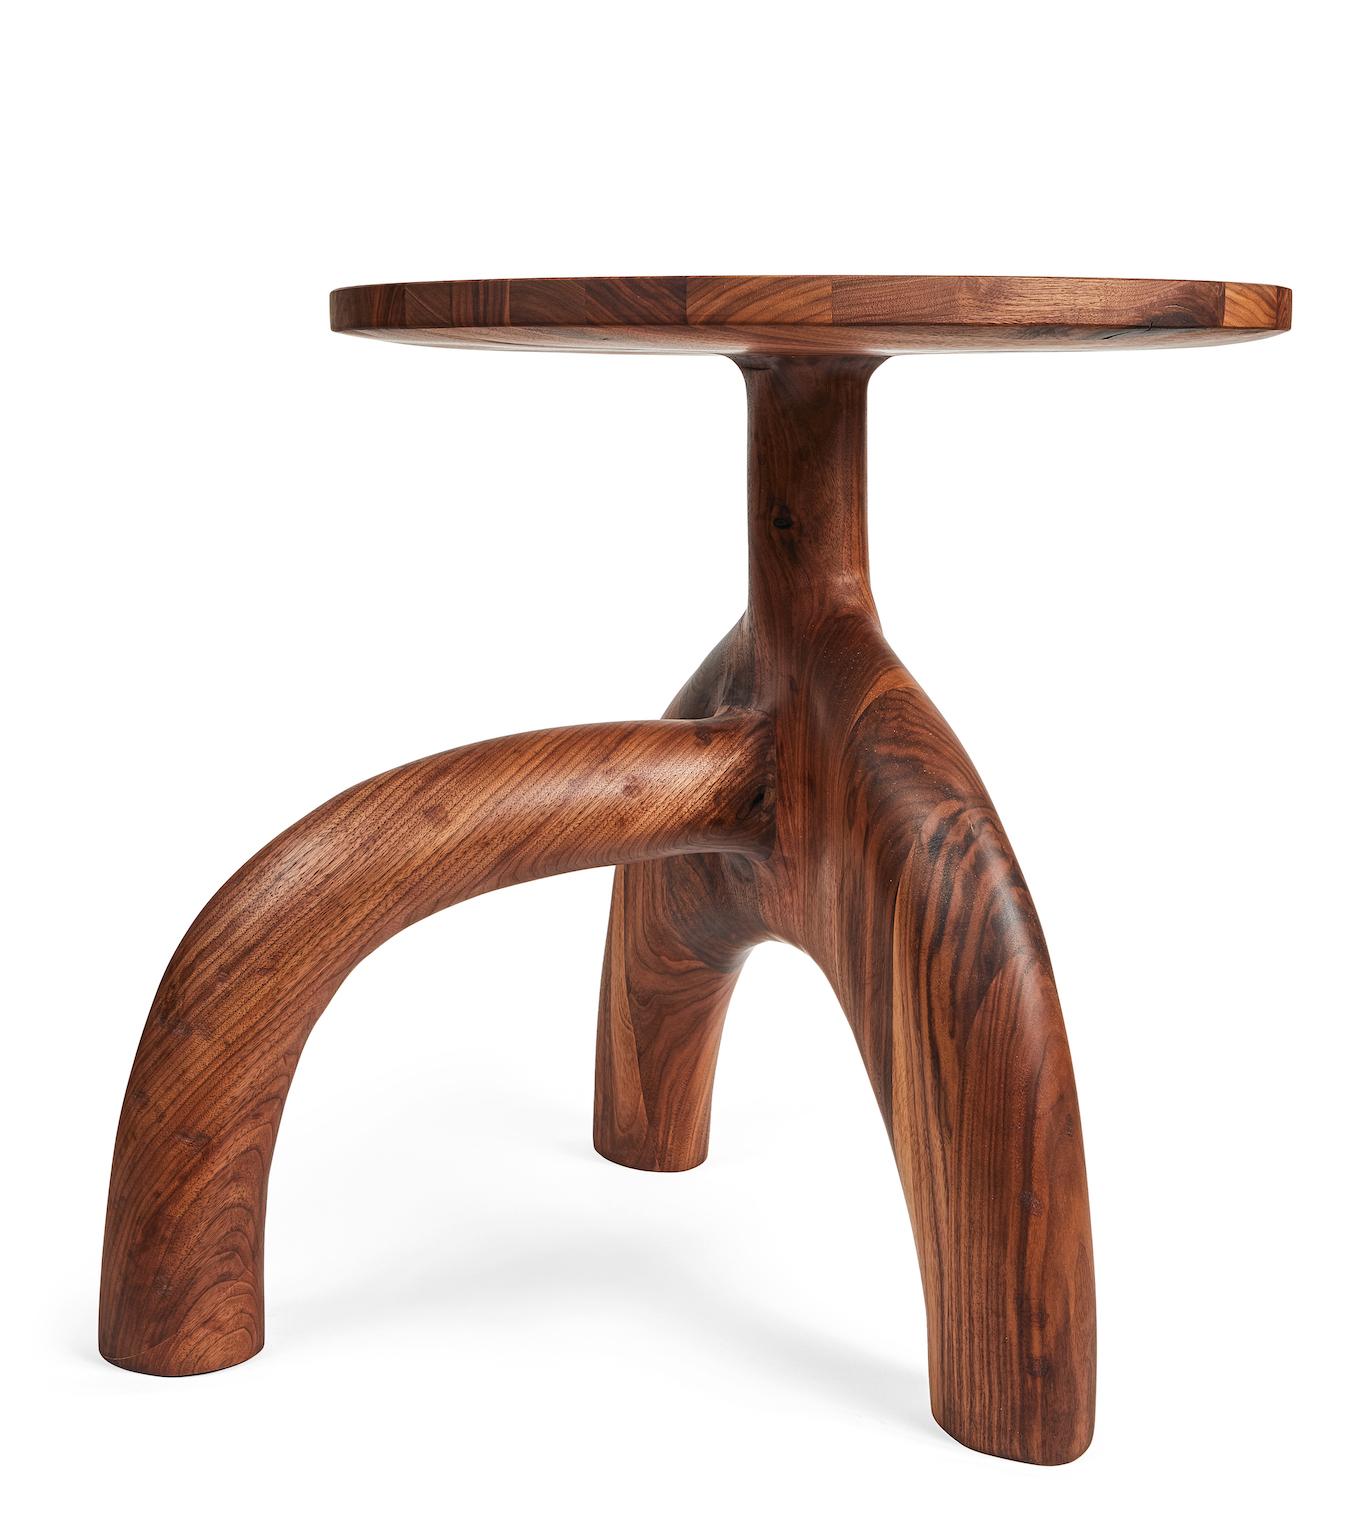 Sculptural organic hand carved, oiled walnut side table. Made in the USA by Casey McCafferty.


Available finishes:
Oiled black walnut, oiled white oak, bleached white oak, charred ash, oxidized maple

Customization is available. Charges may